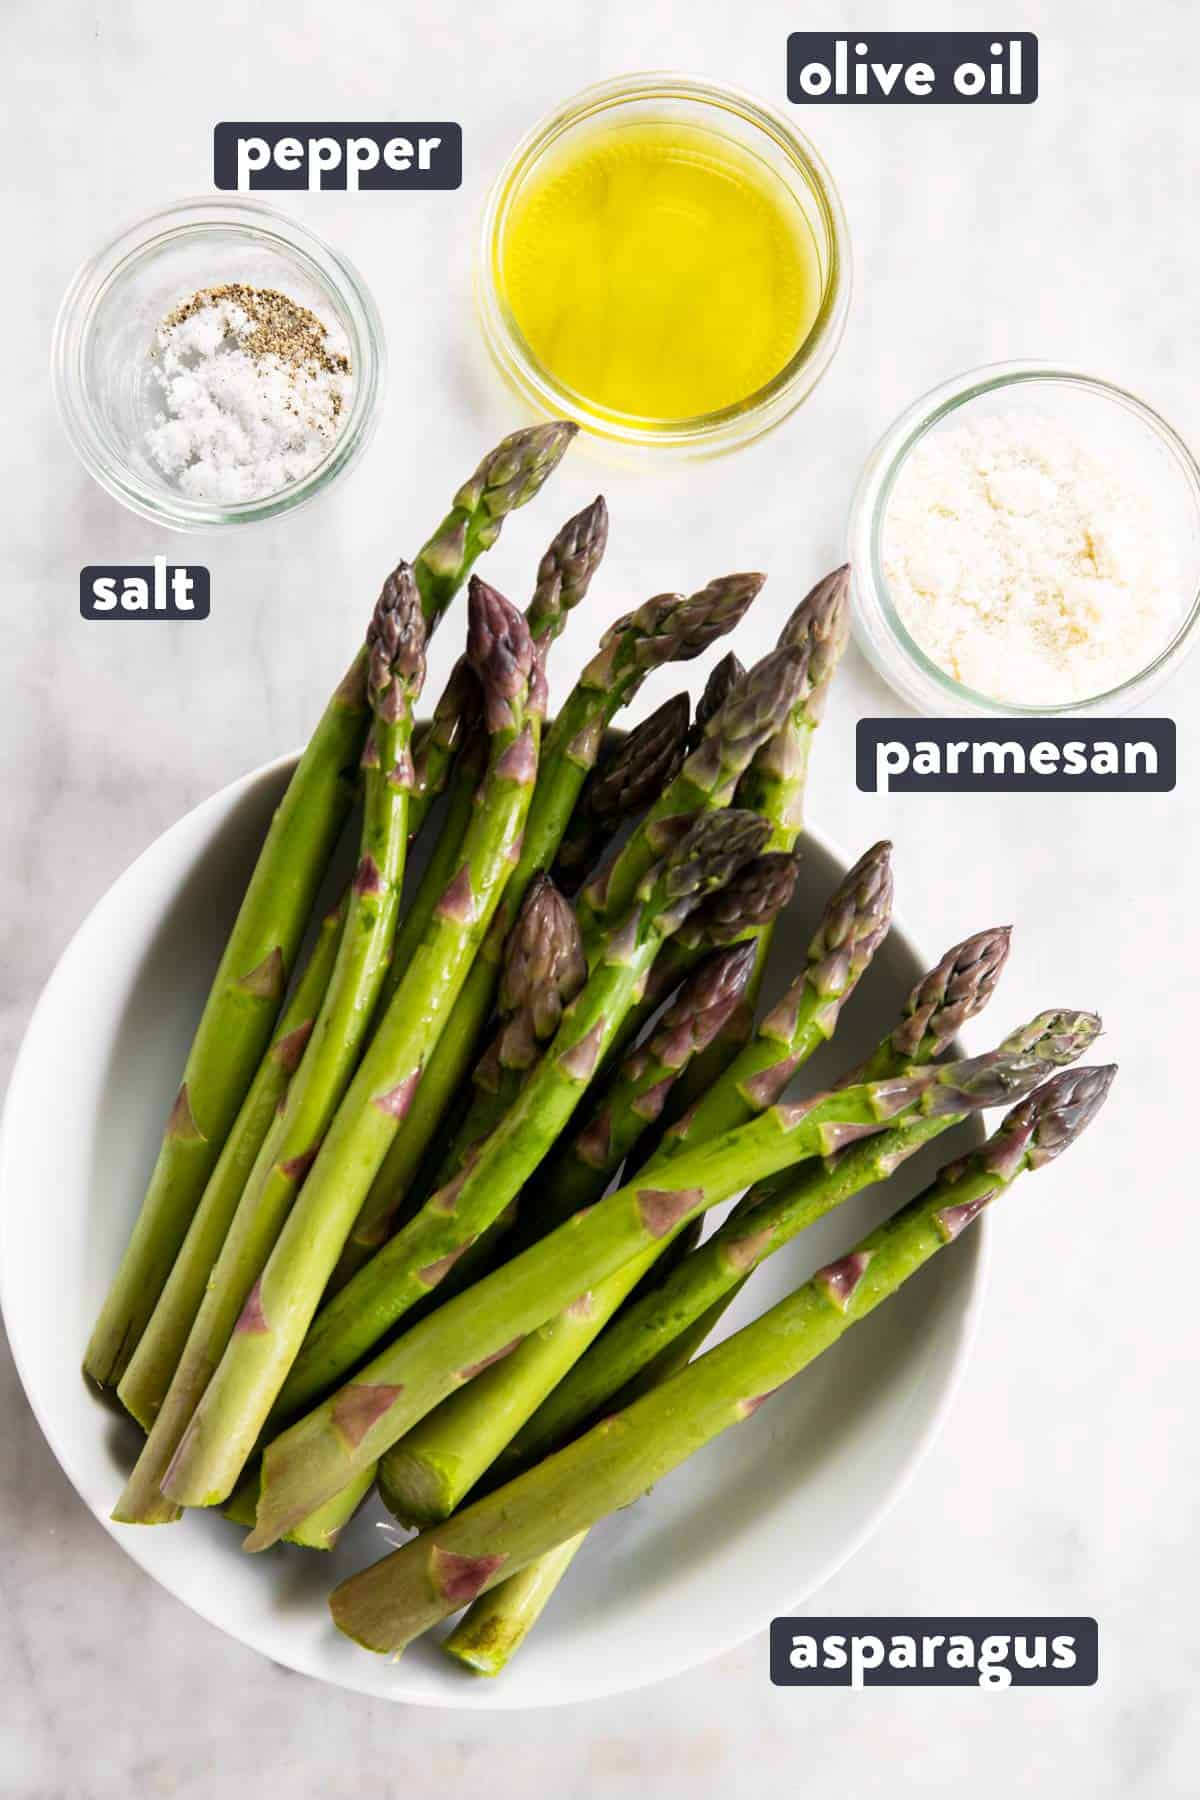 ingredients for air fryer asparagus with text labels